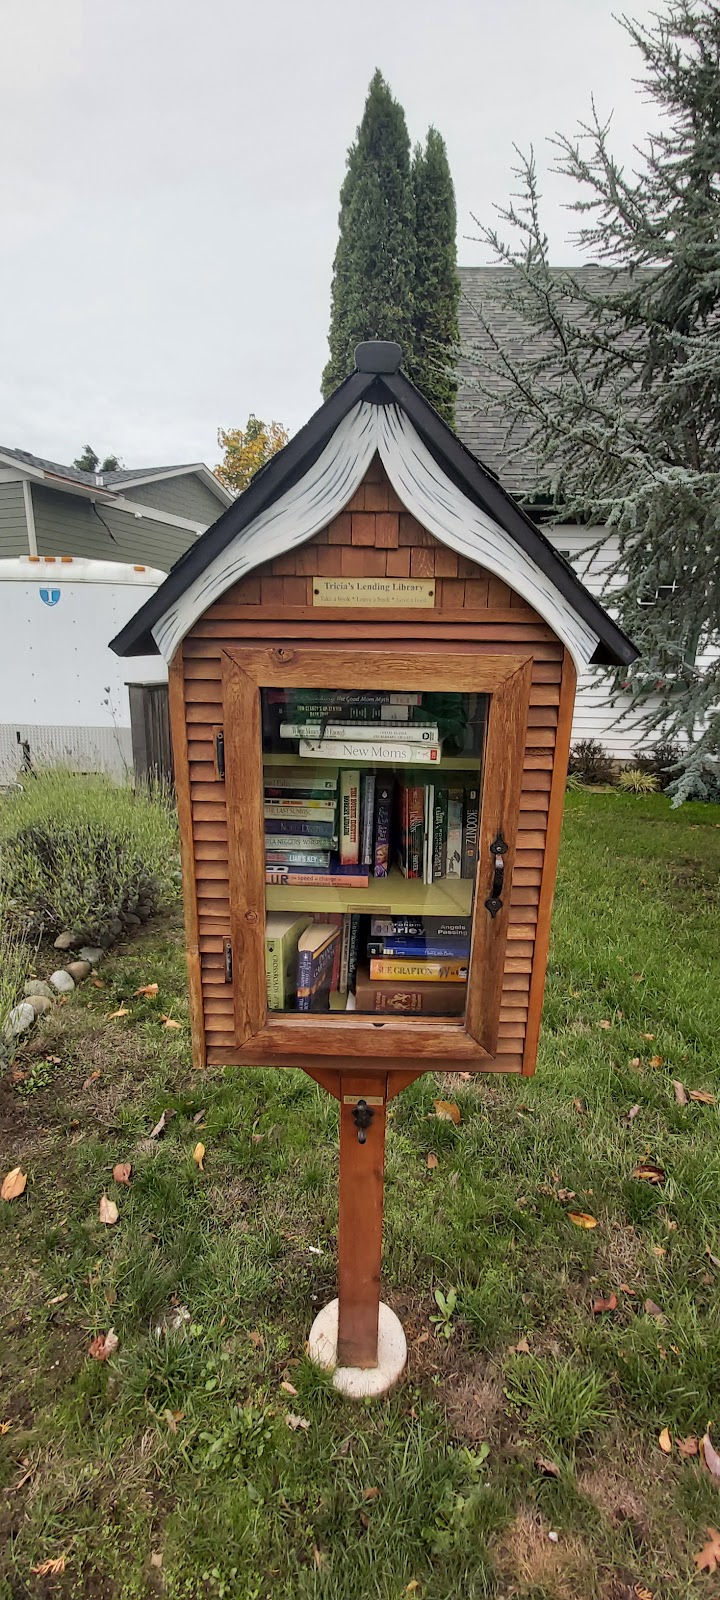 Tricia’s Free Lending Library –